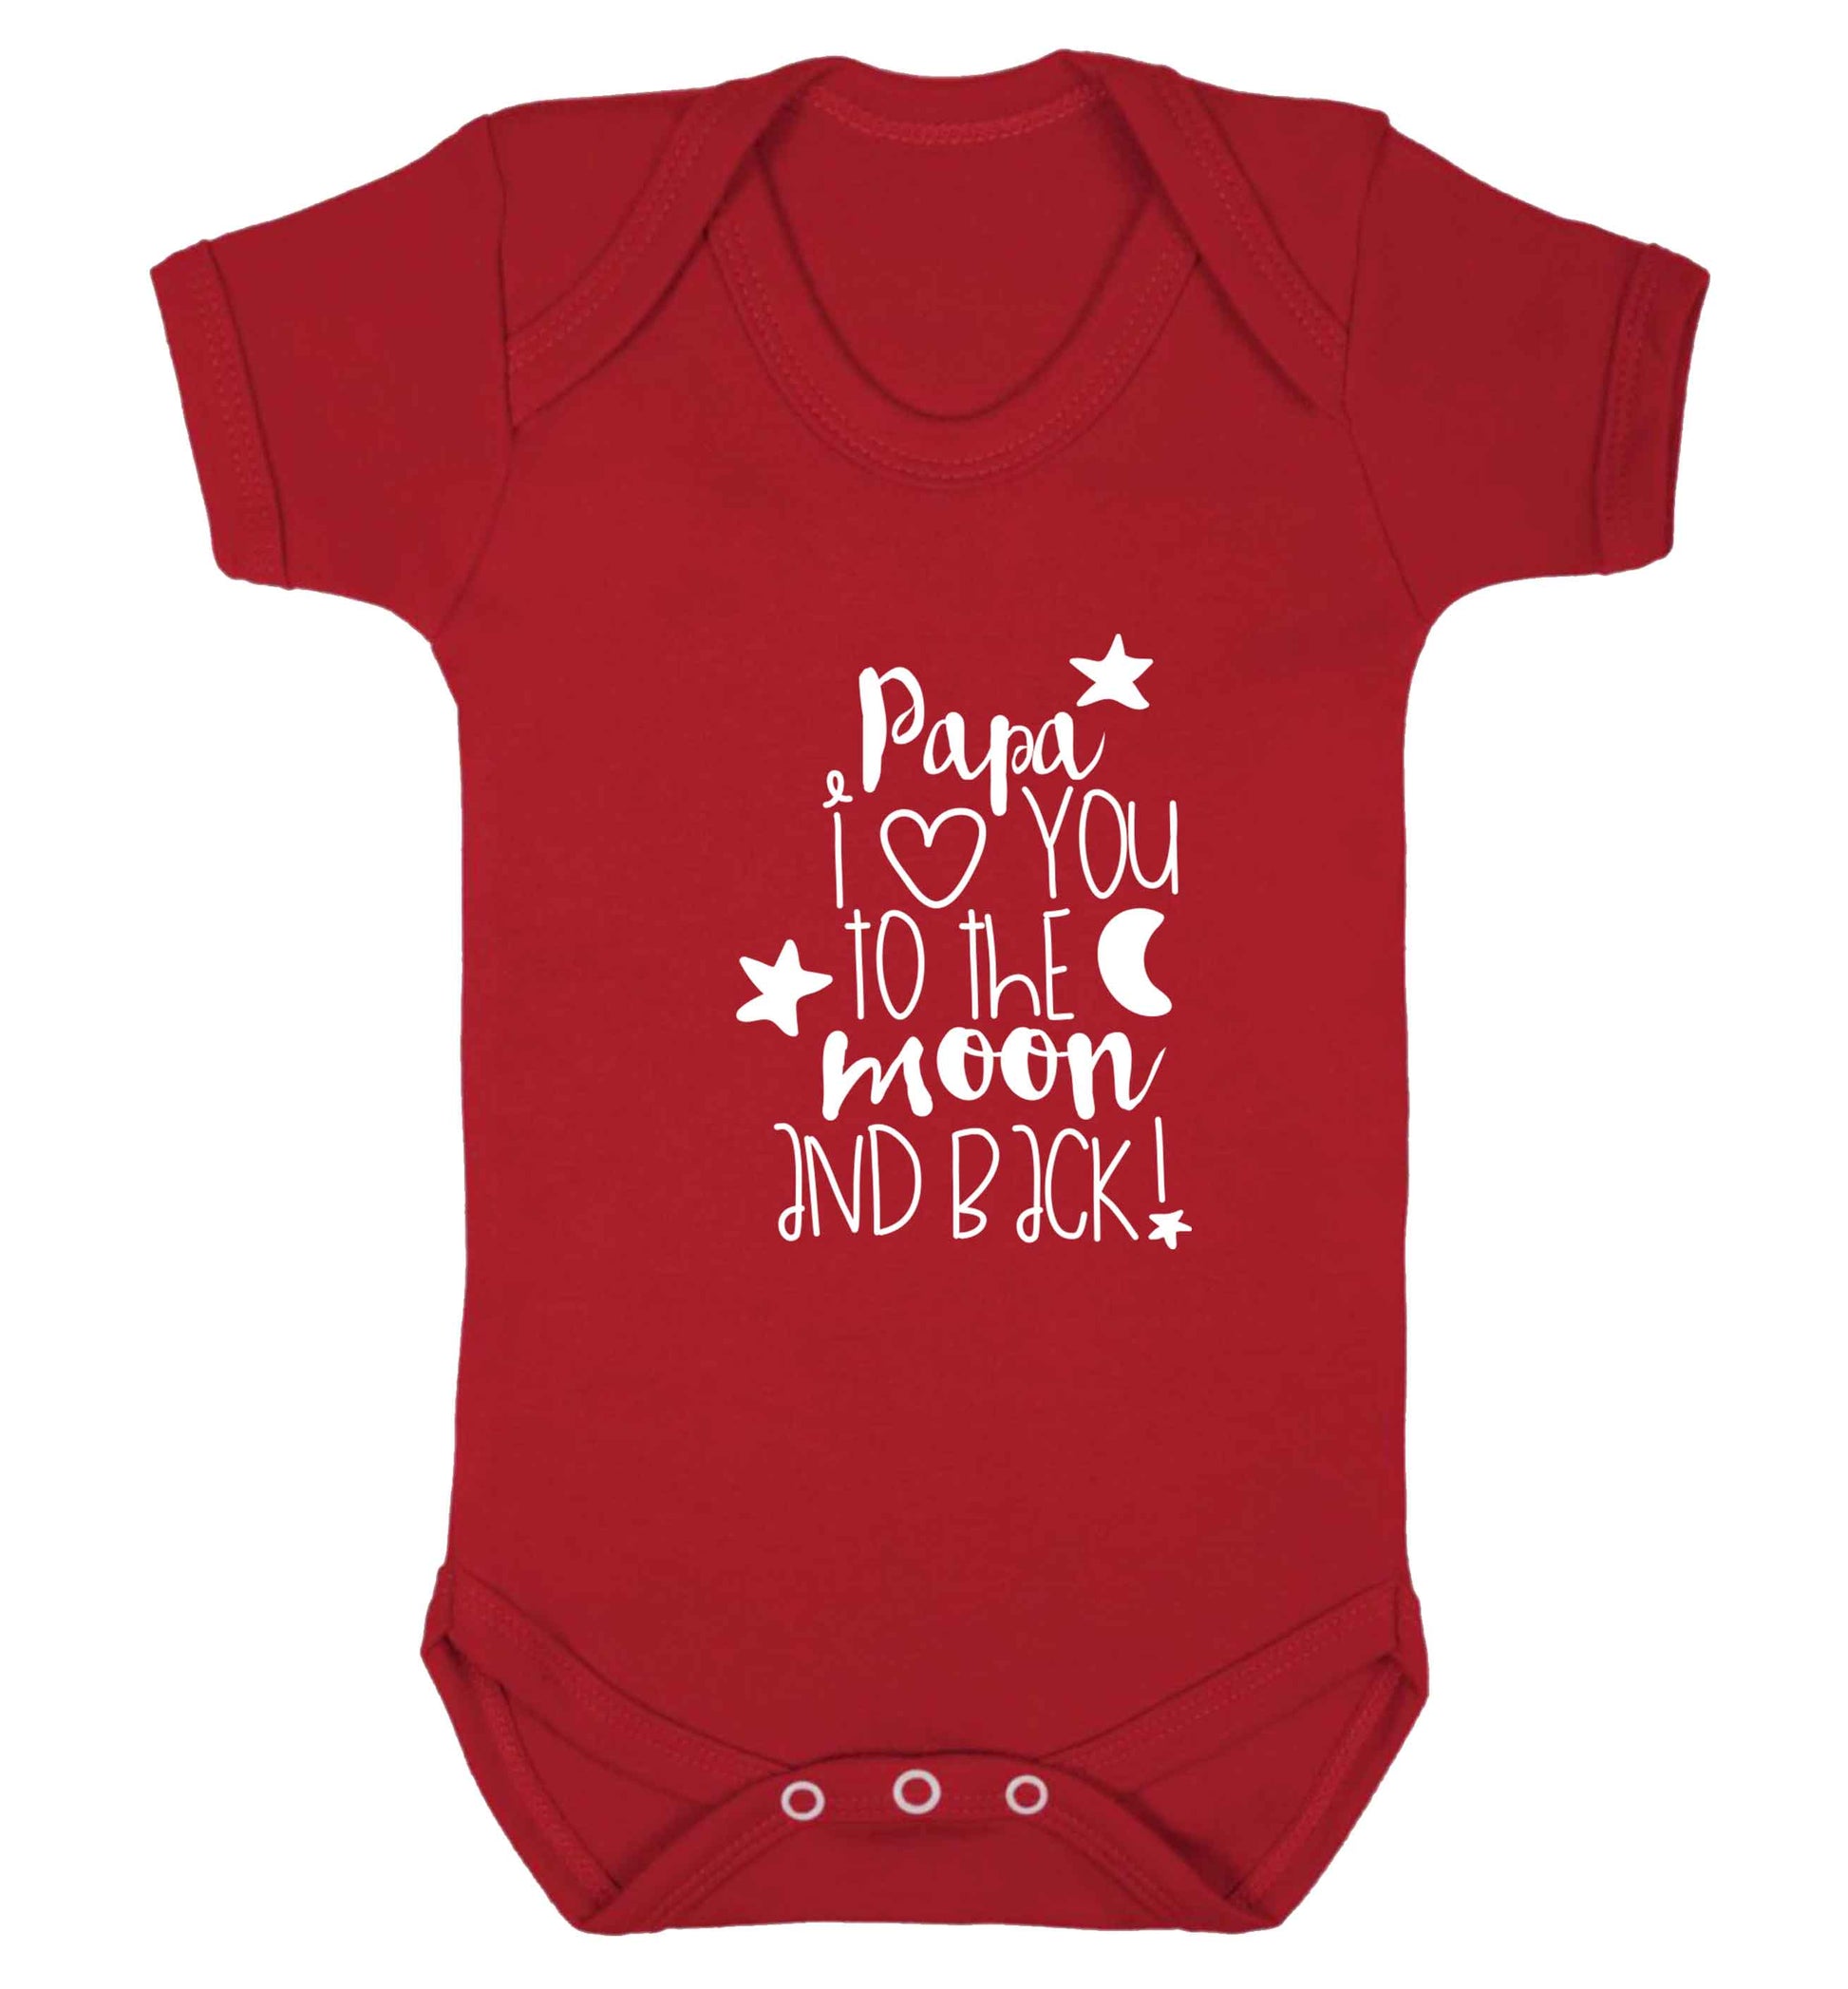 Papa I love you to the moon and back baby vest red 18-24 months